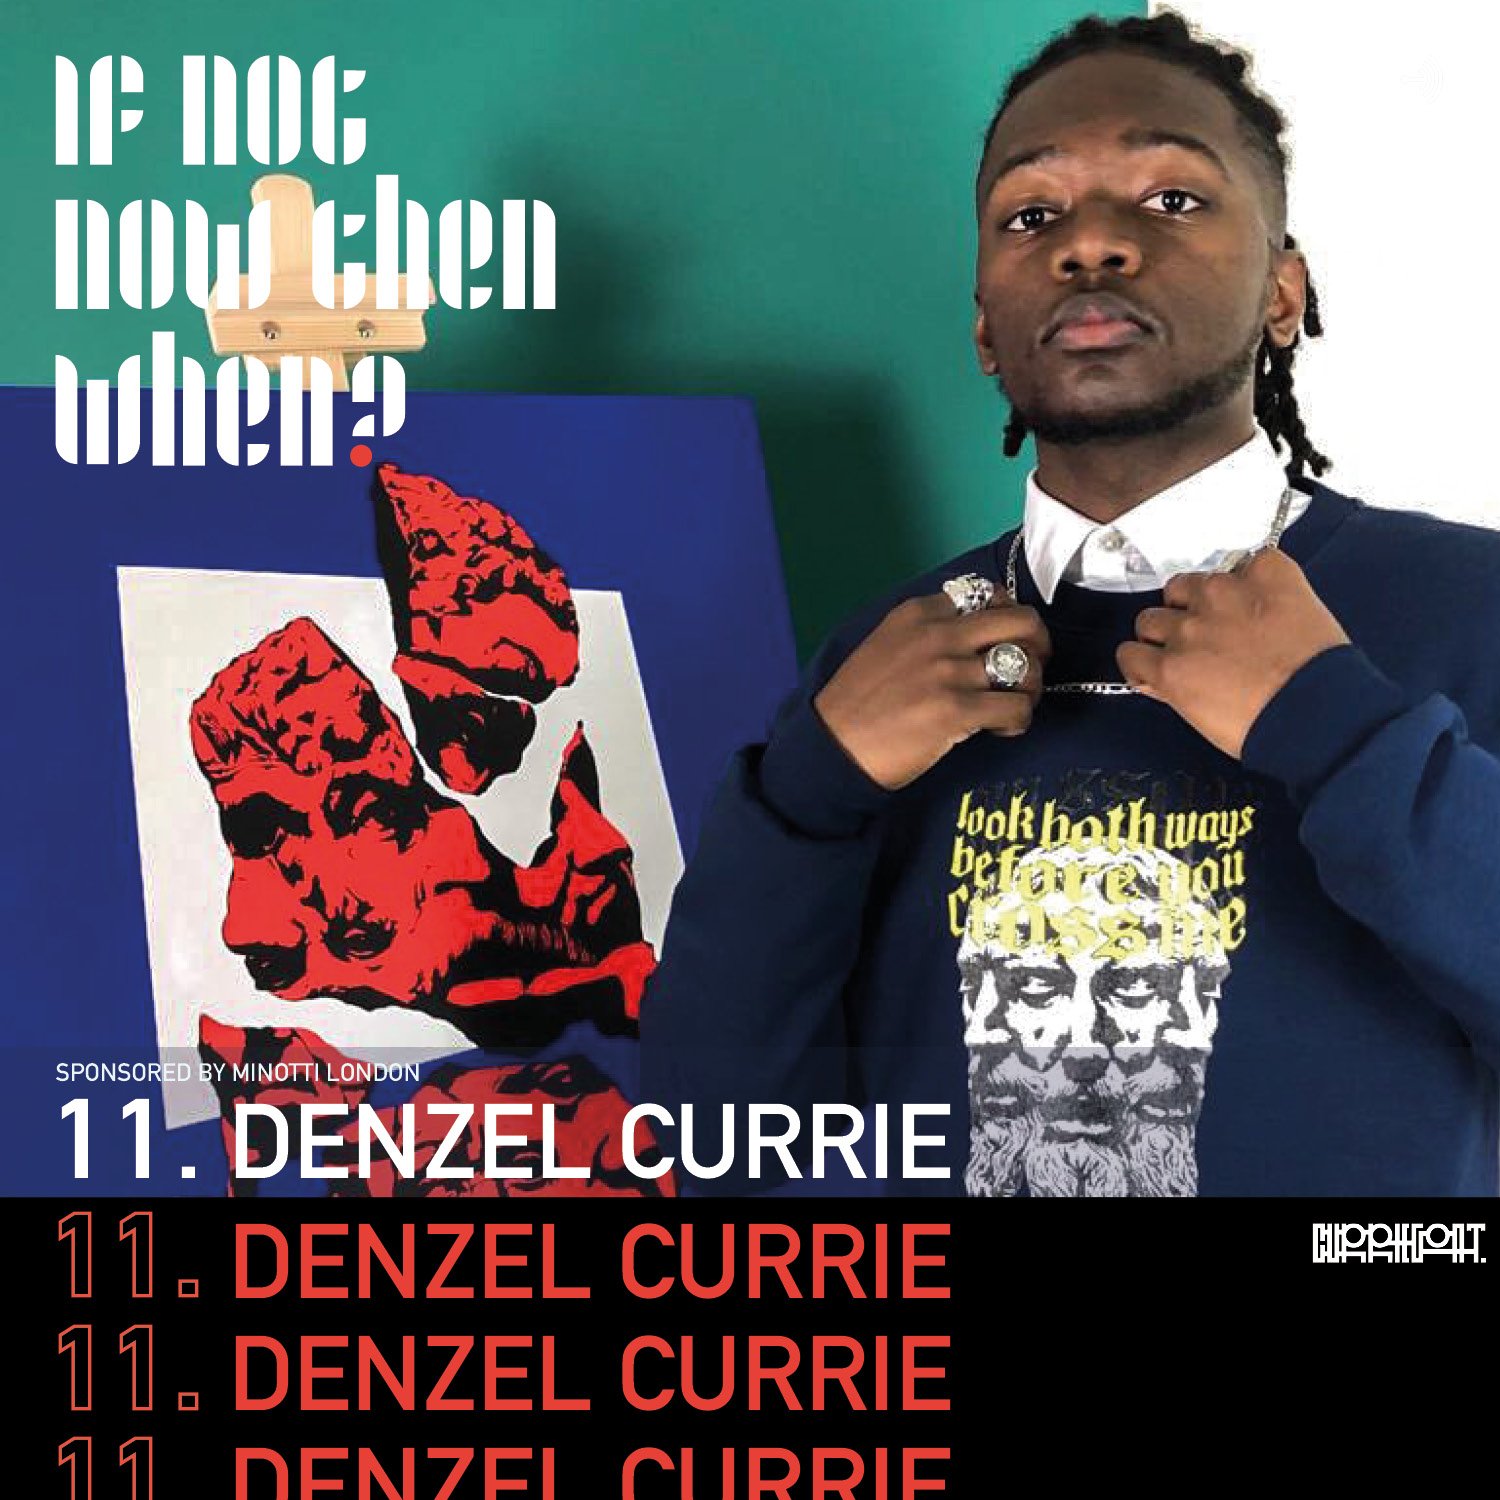 DENZEL CURRIE